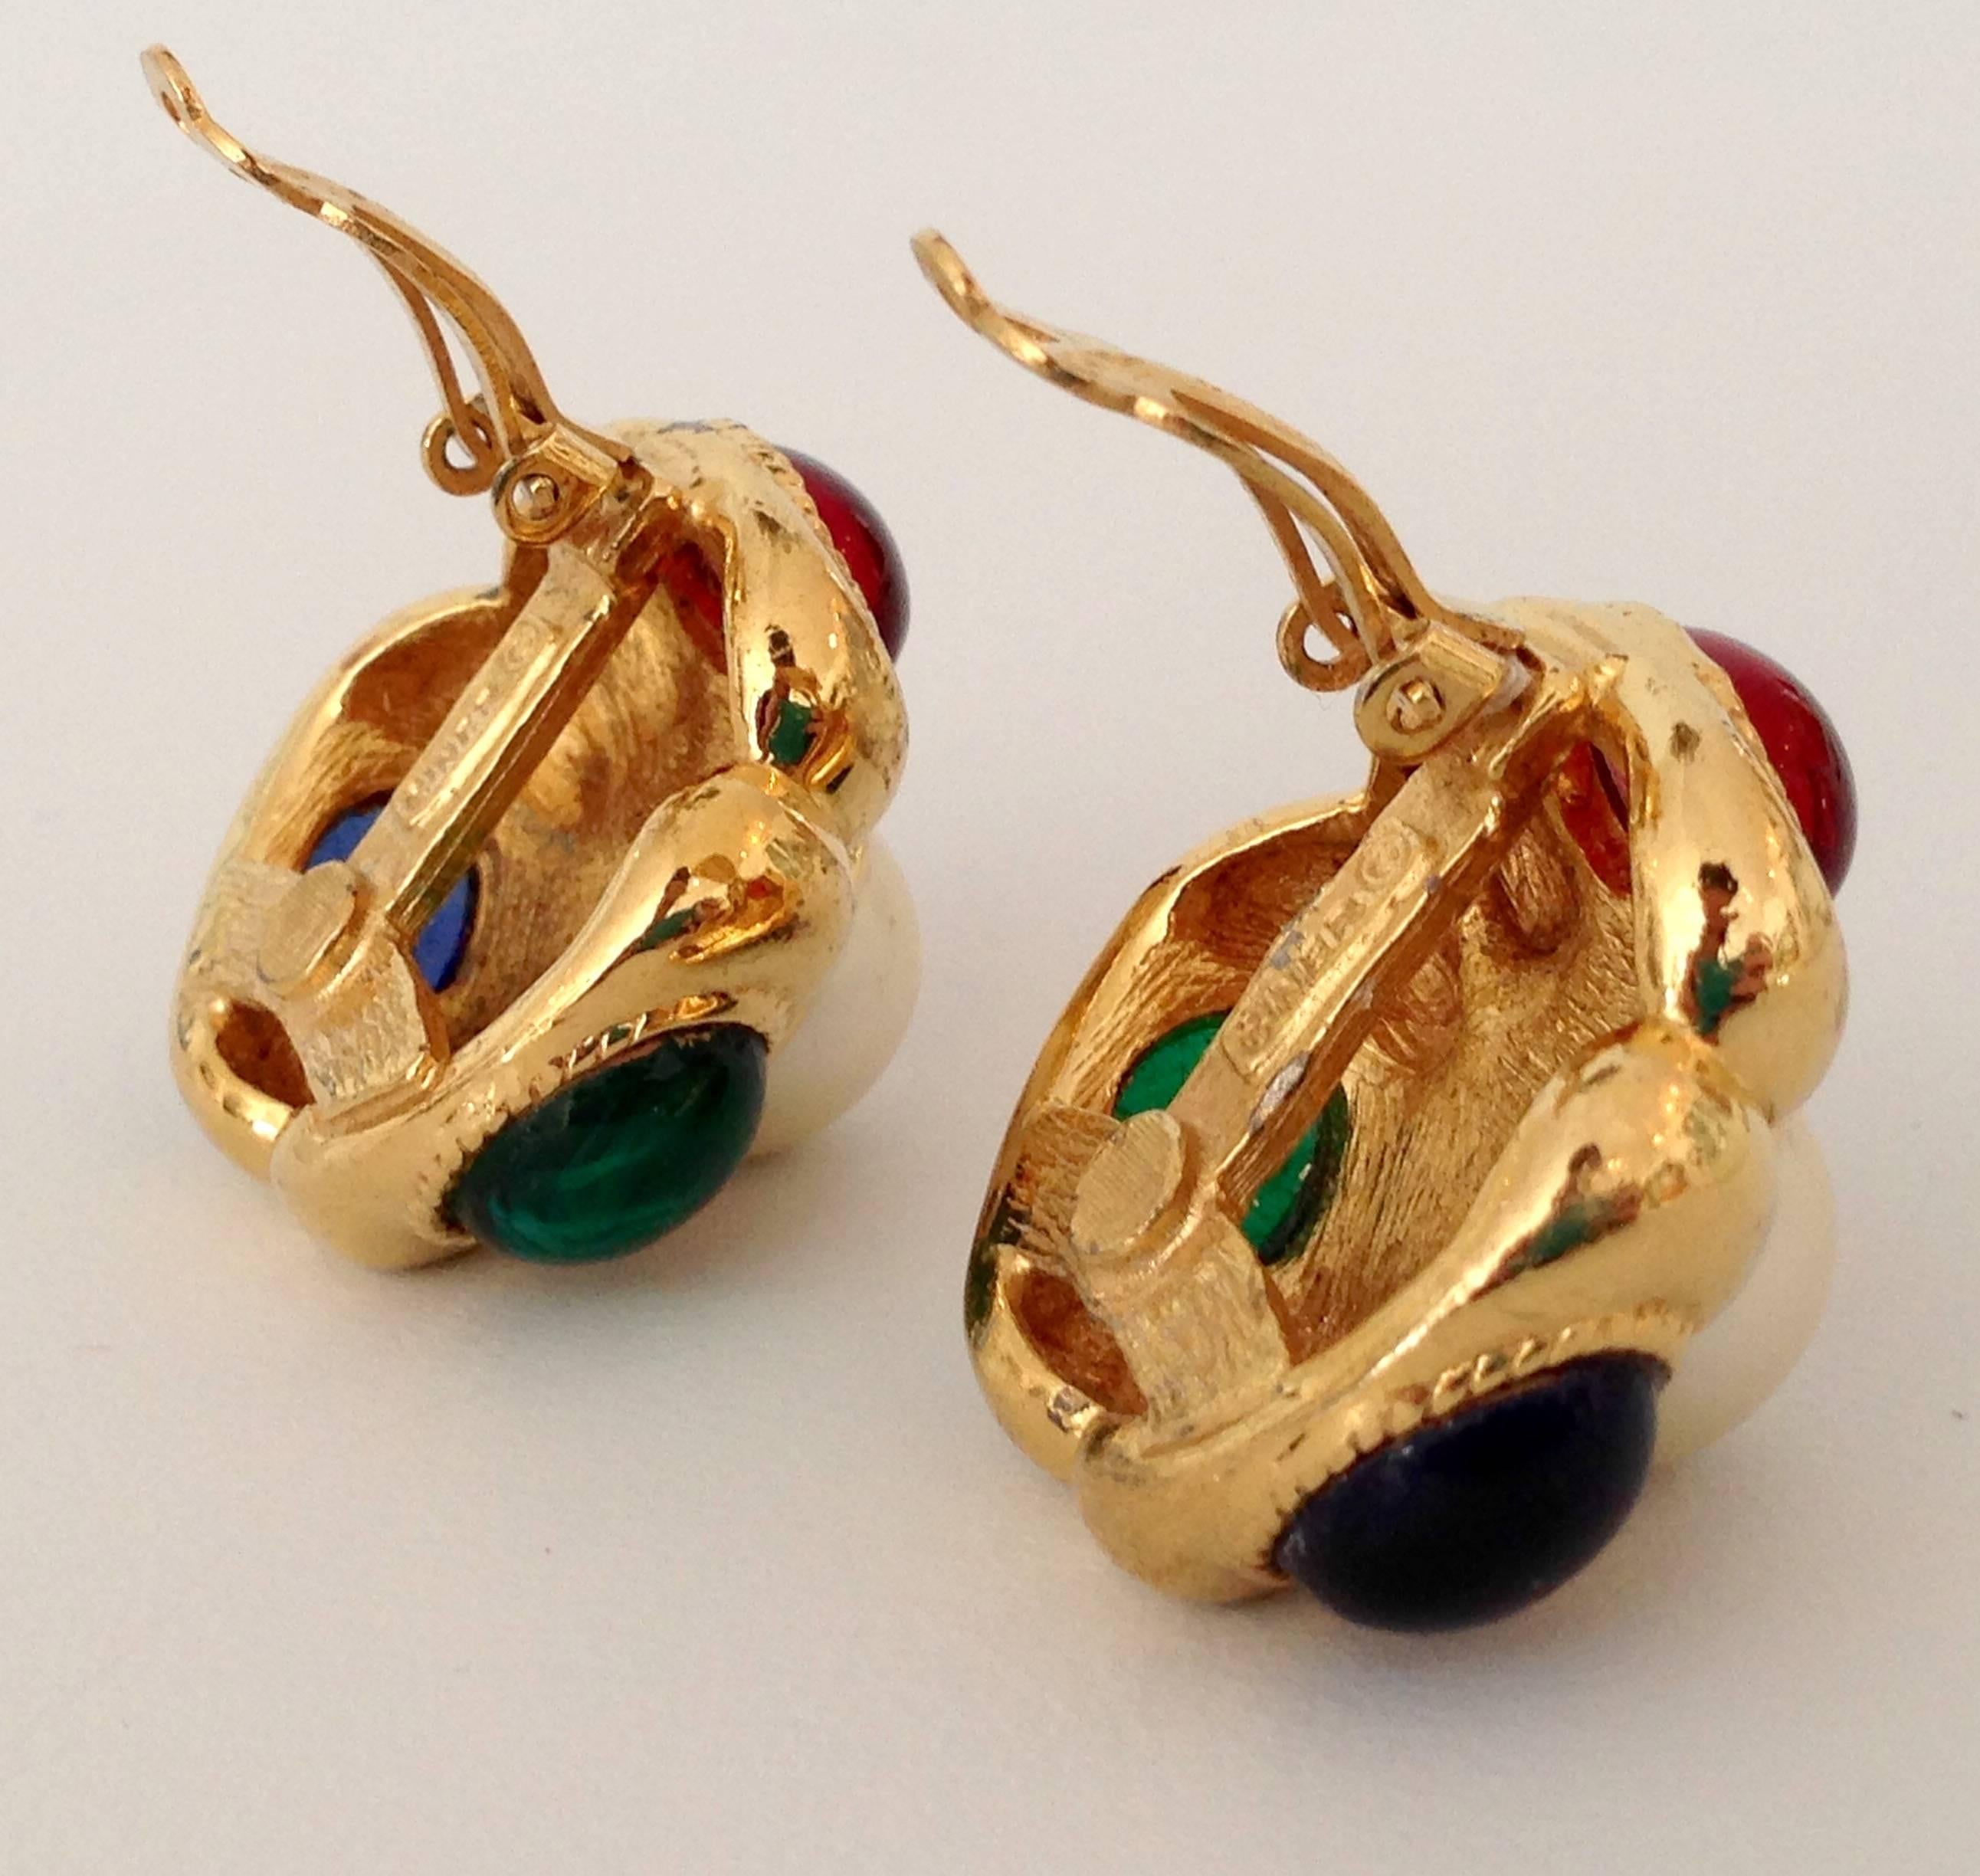 Vintage Ciner clip style earrings with glass cabochon set stones, fashioned as emerald, ruby and sapphires with a central large round single faux pearl stone.
Each earring is engraved stamped on the back side, 